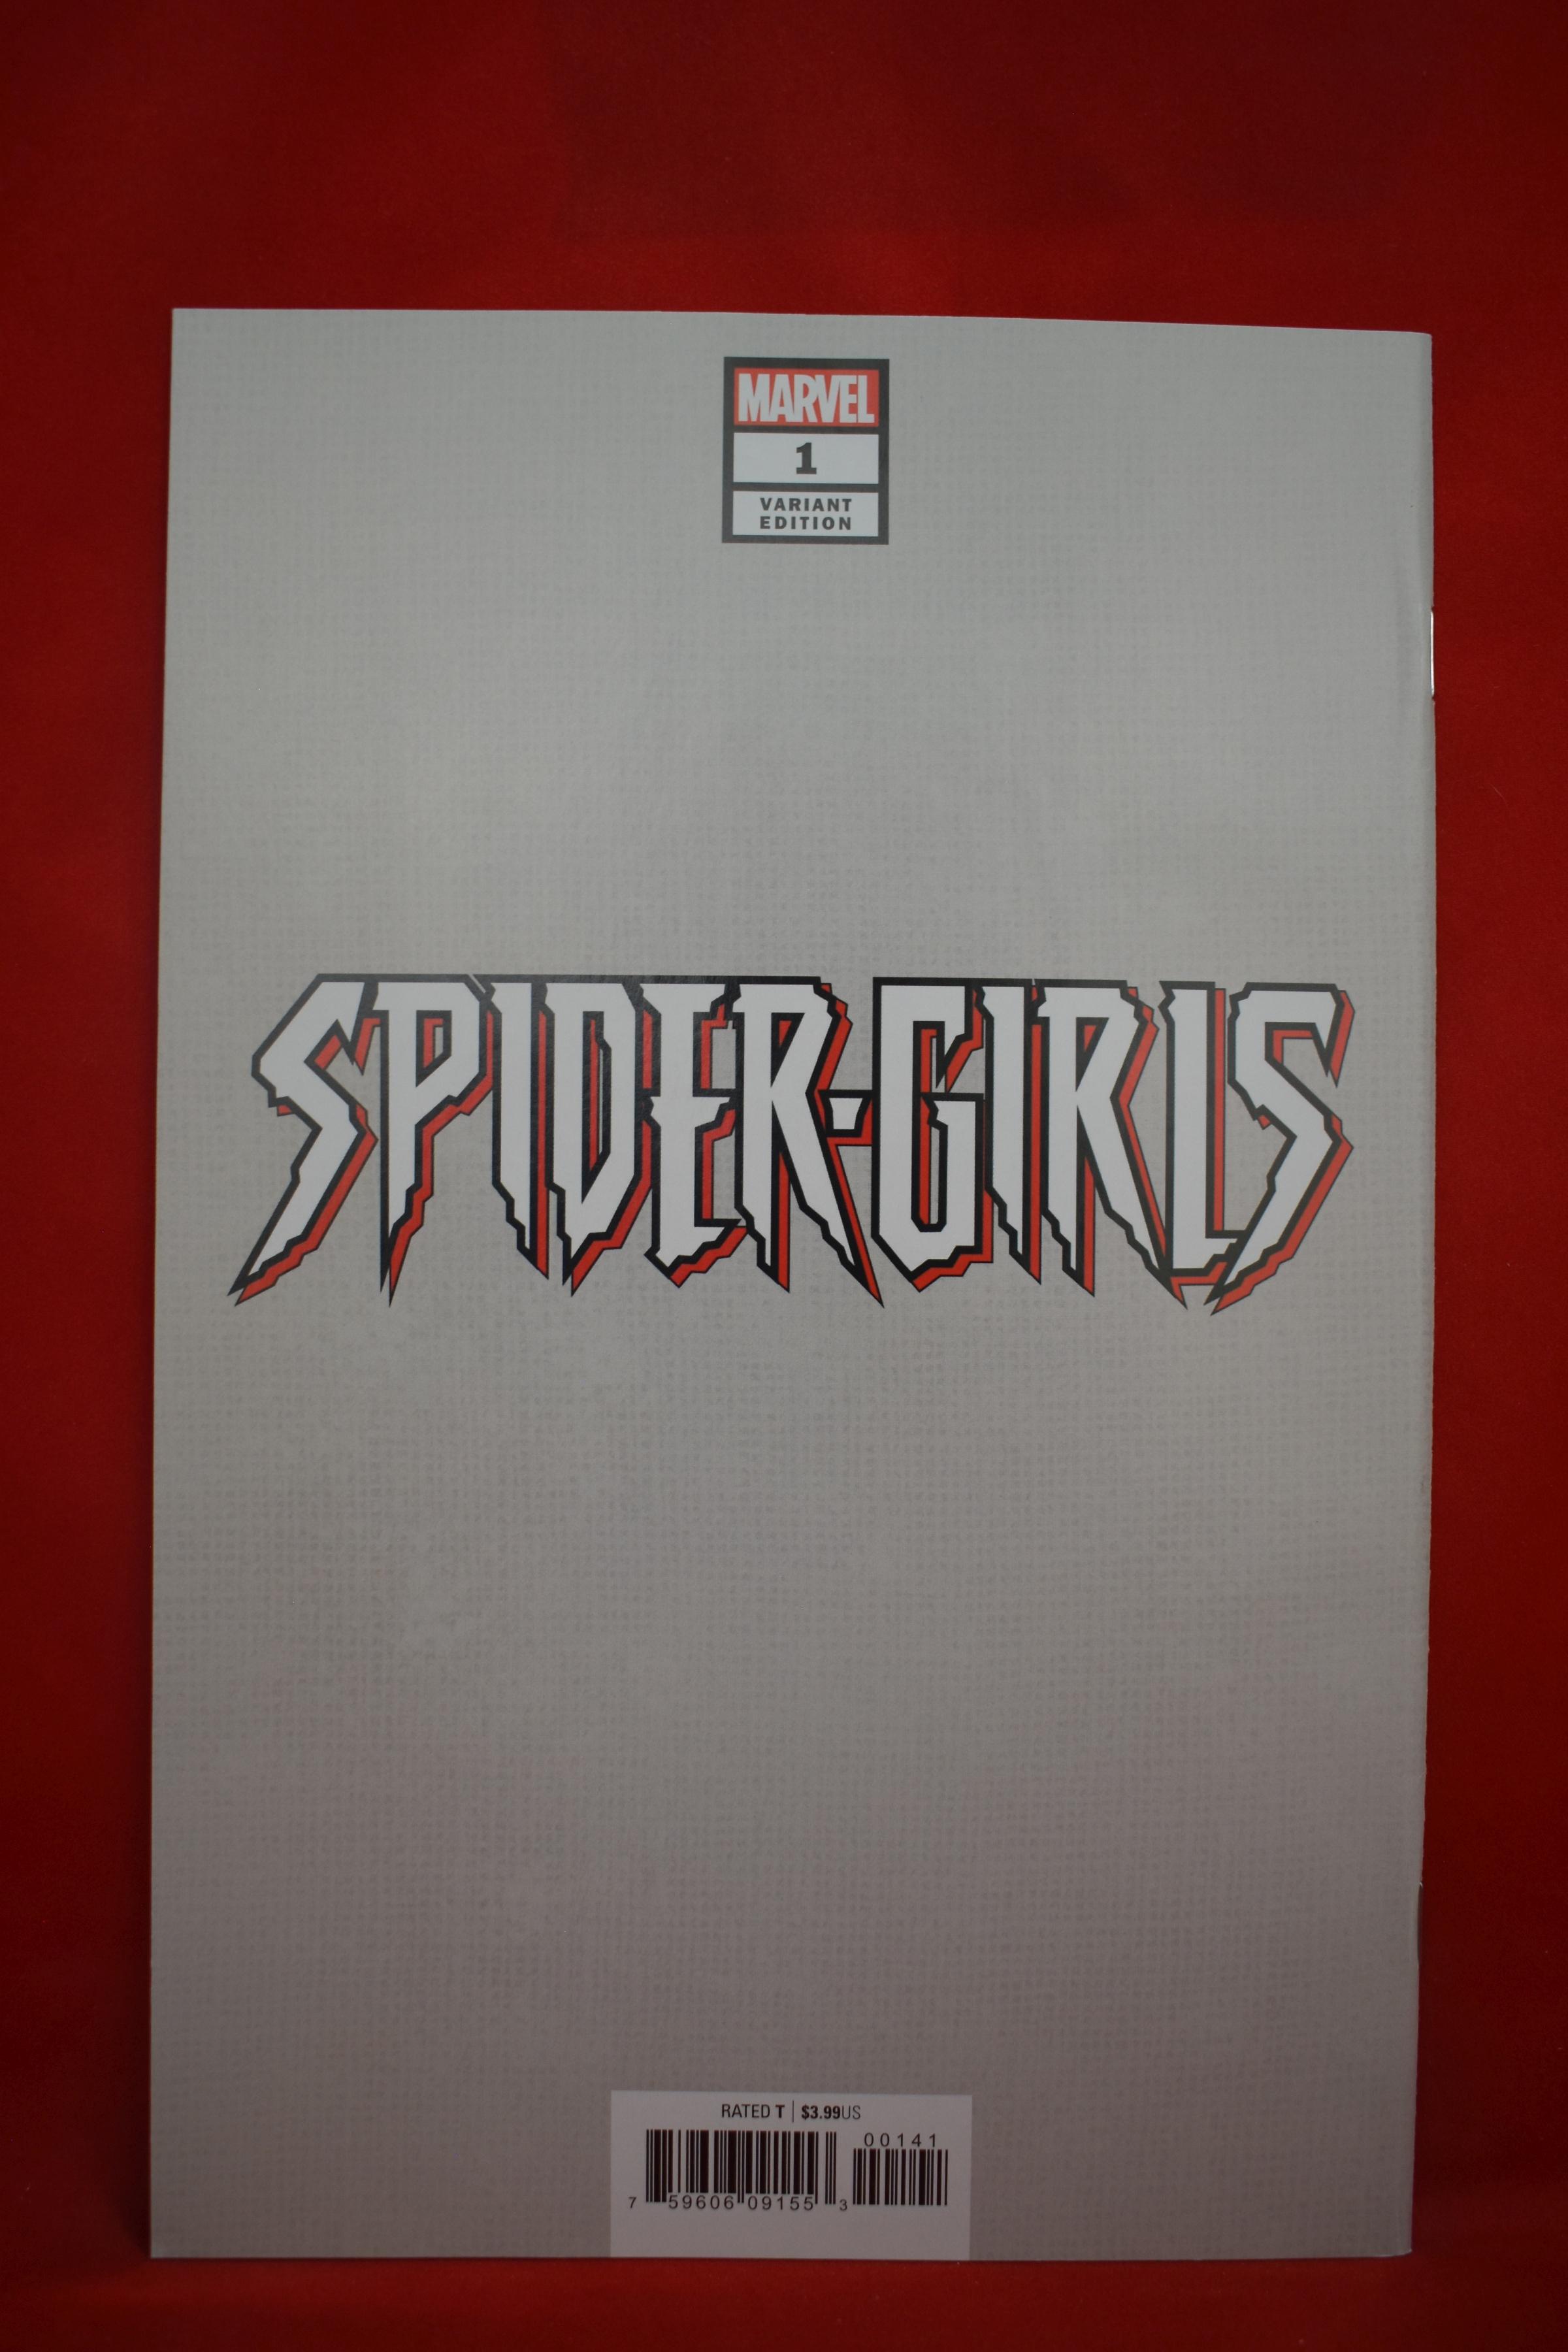 SPIDER-GIRLS #1 | LIMITED PRINT NEW YORK COMIC CON VARIANT